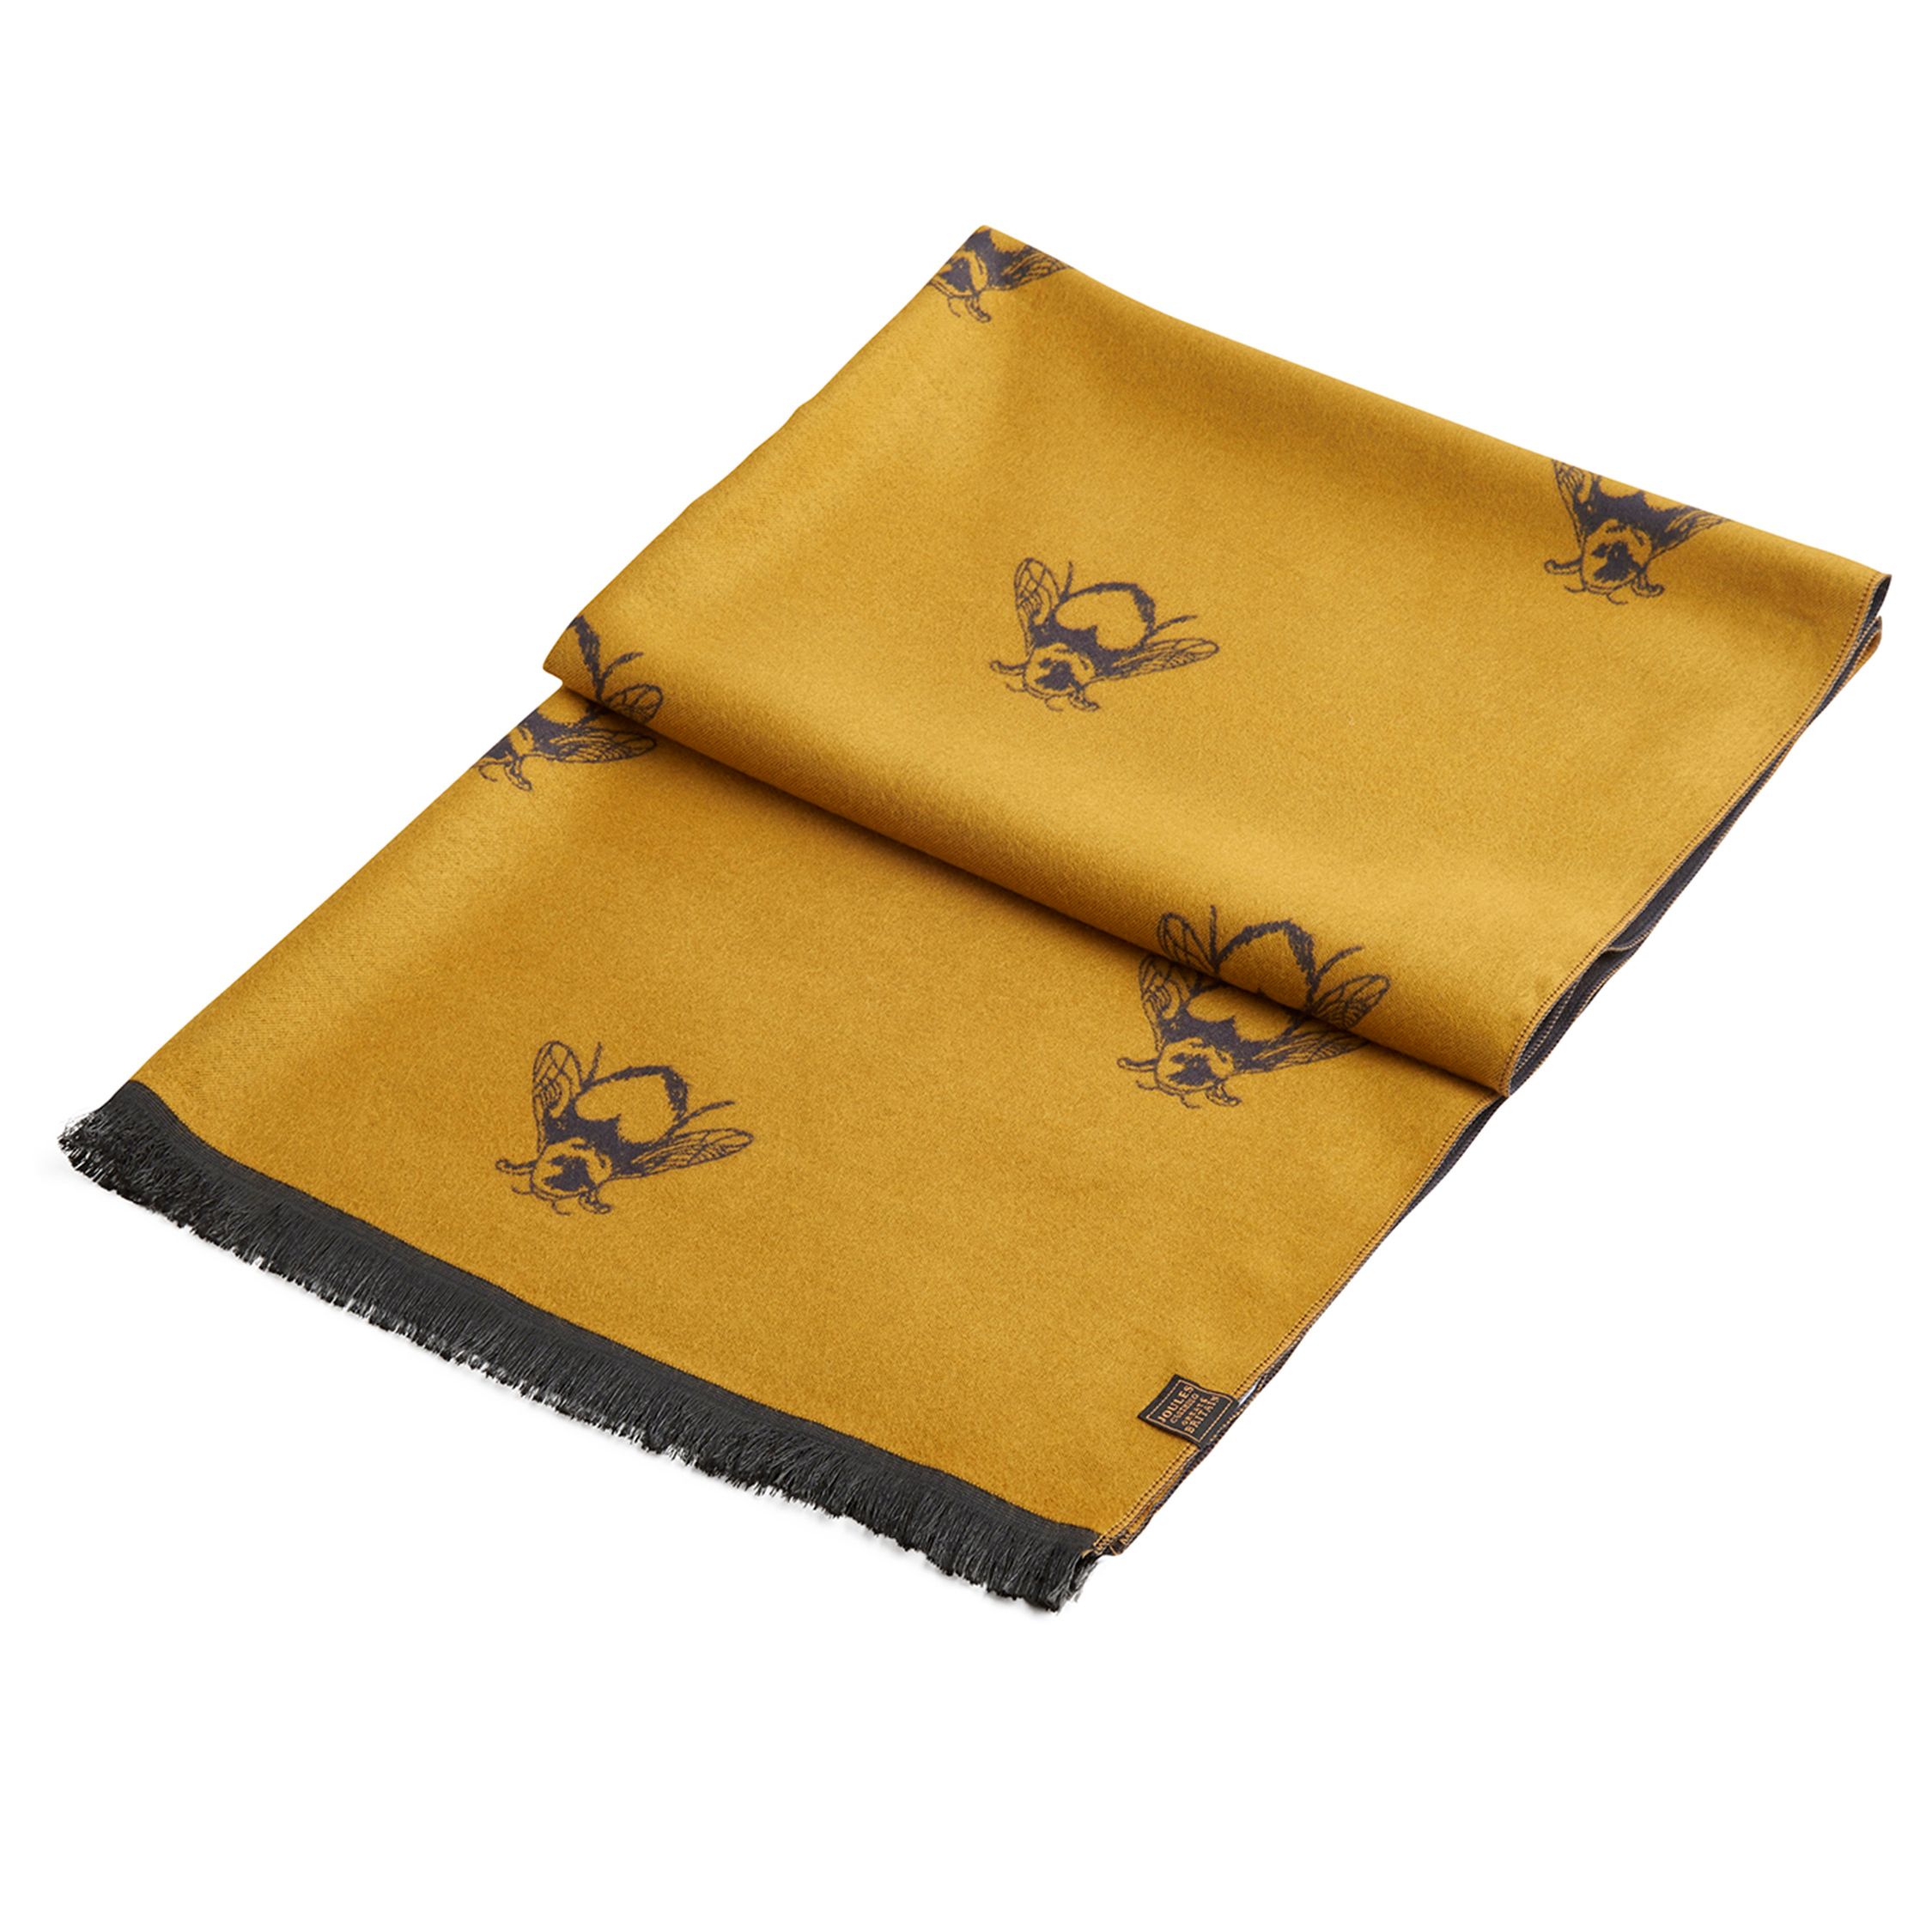 Joules Jacquelyn Bee Print Scarf, Gold/Black at John Lewis & Partners